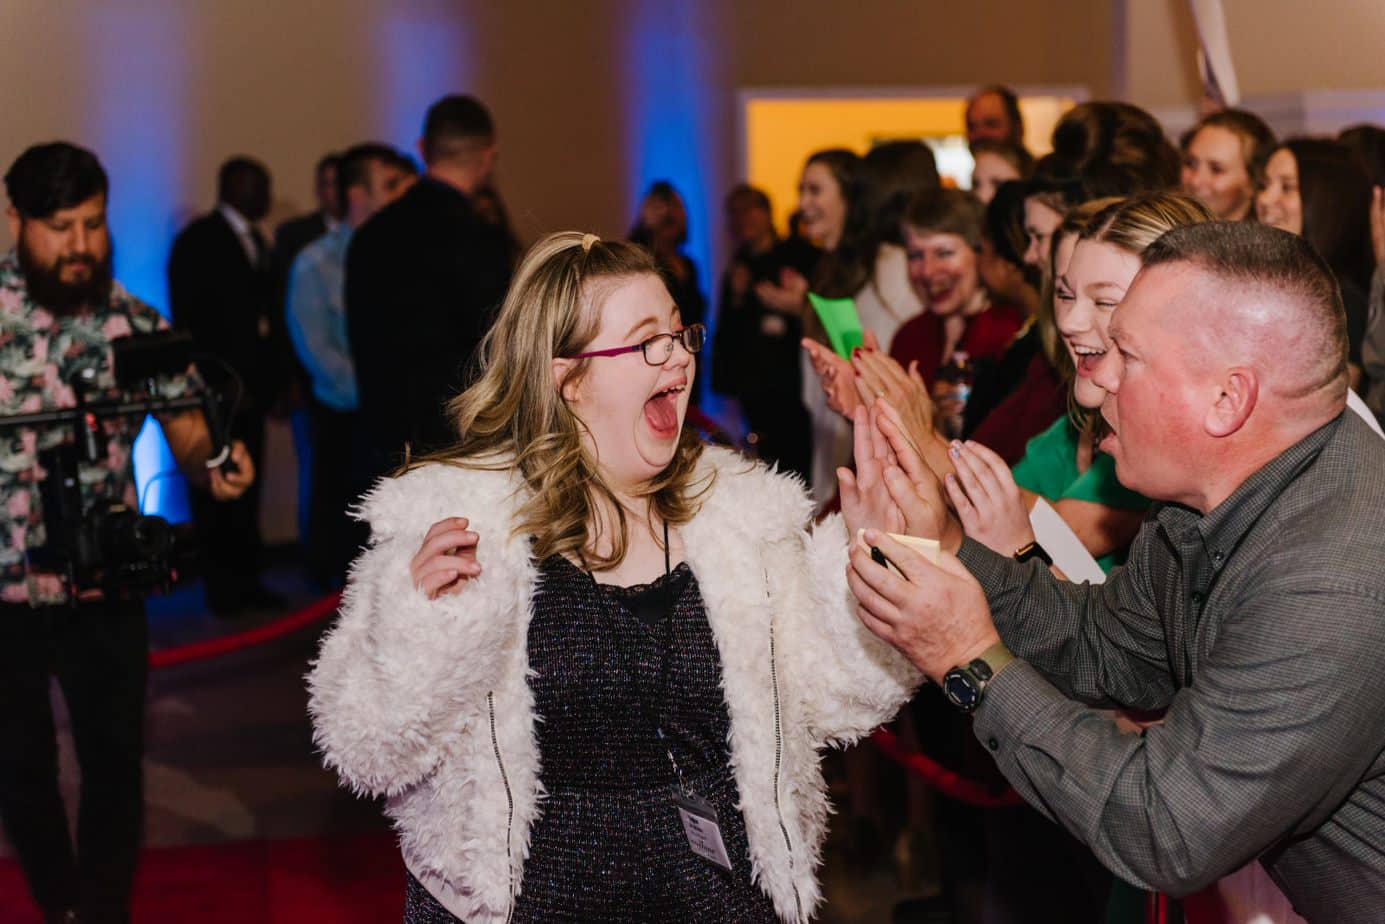 Dunwoody United Methodist will host the Tim Tebow Foundation's Night to Shine prom for special needs kids